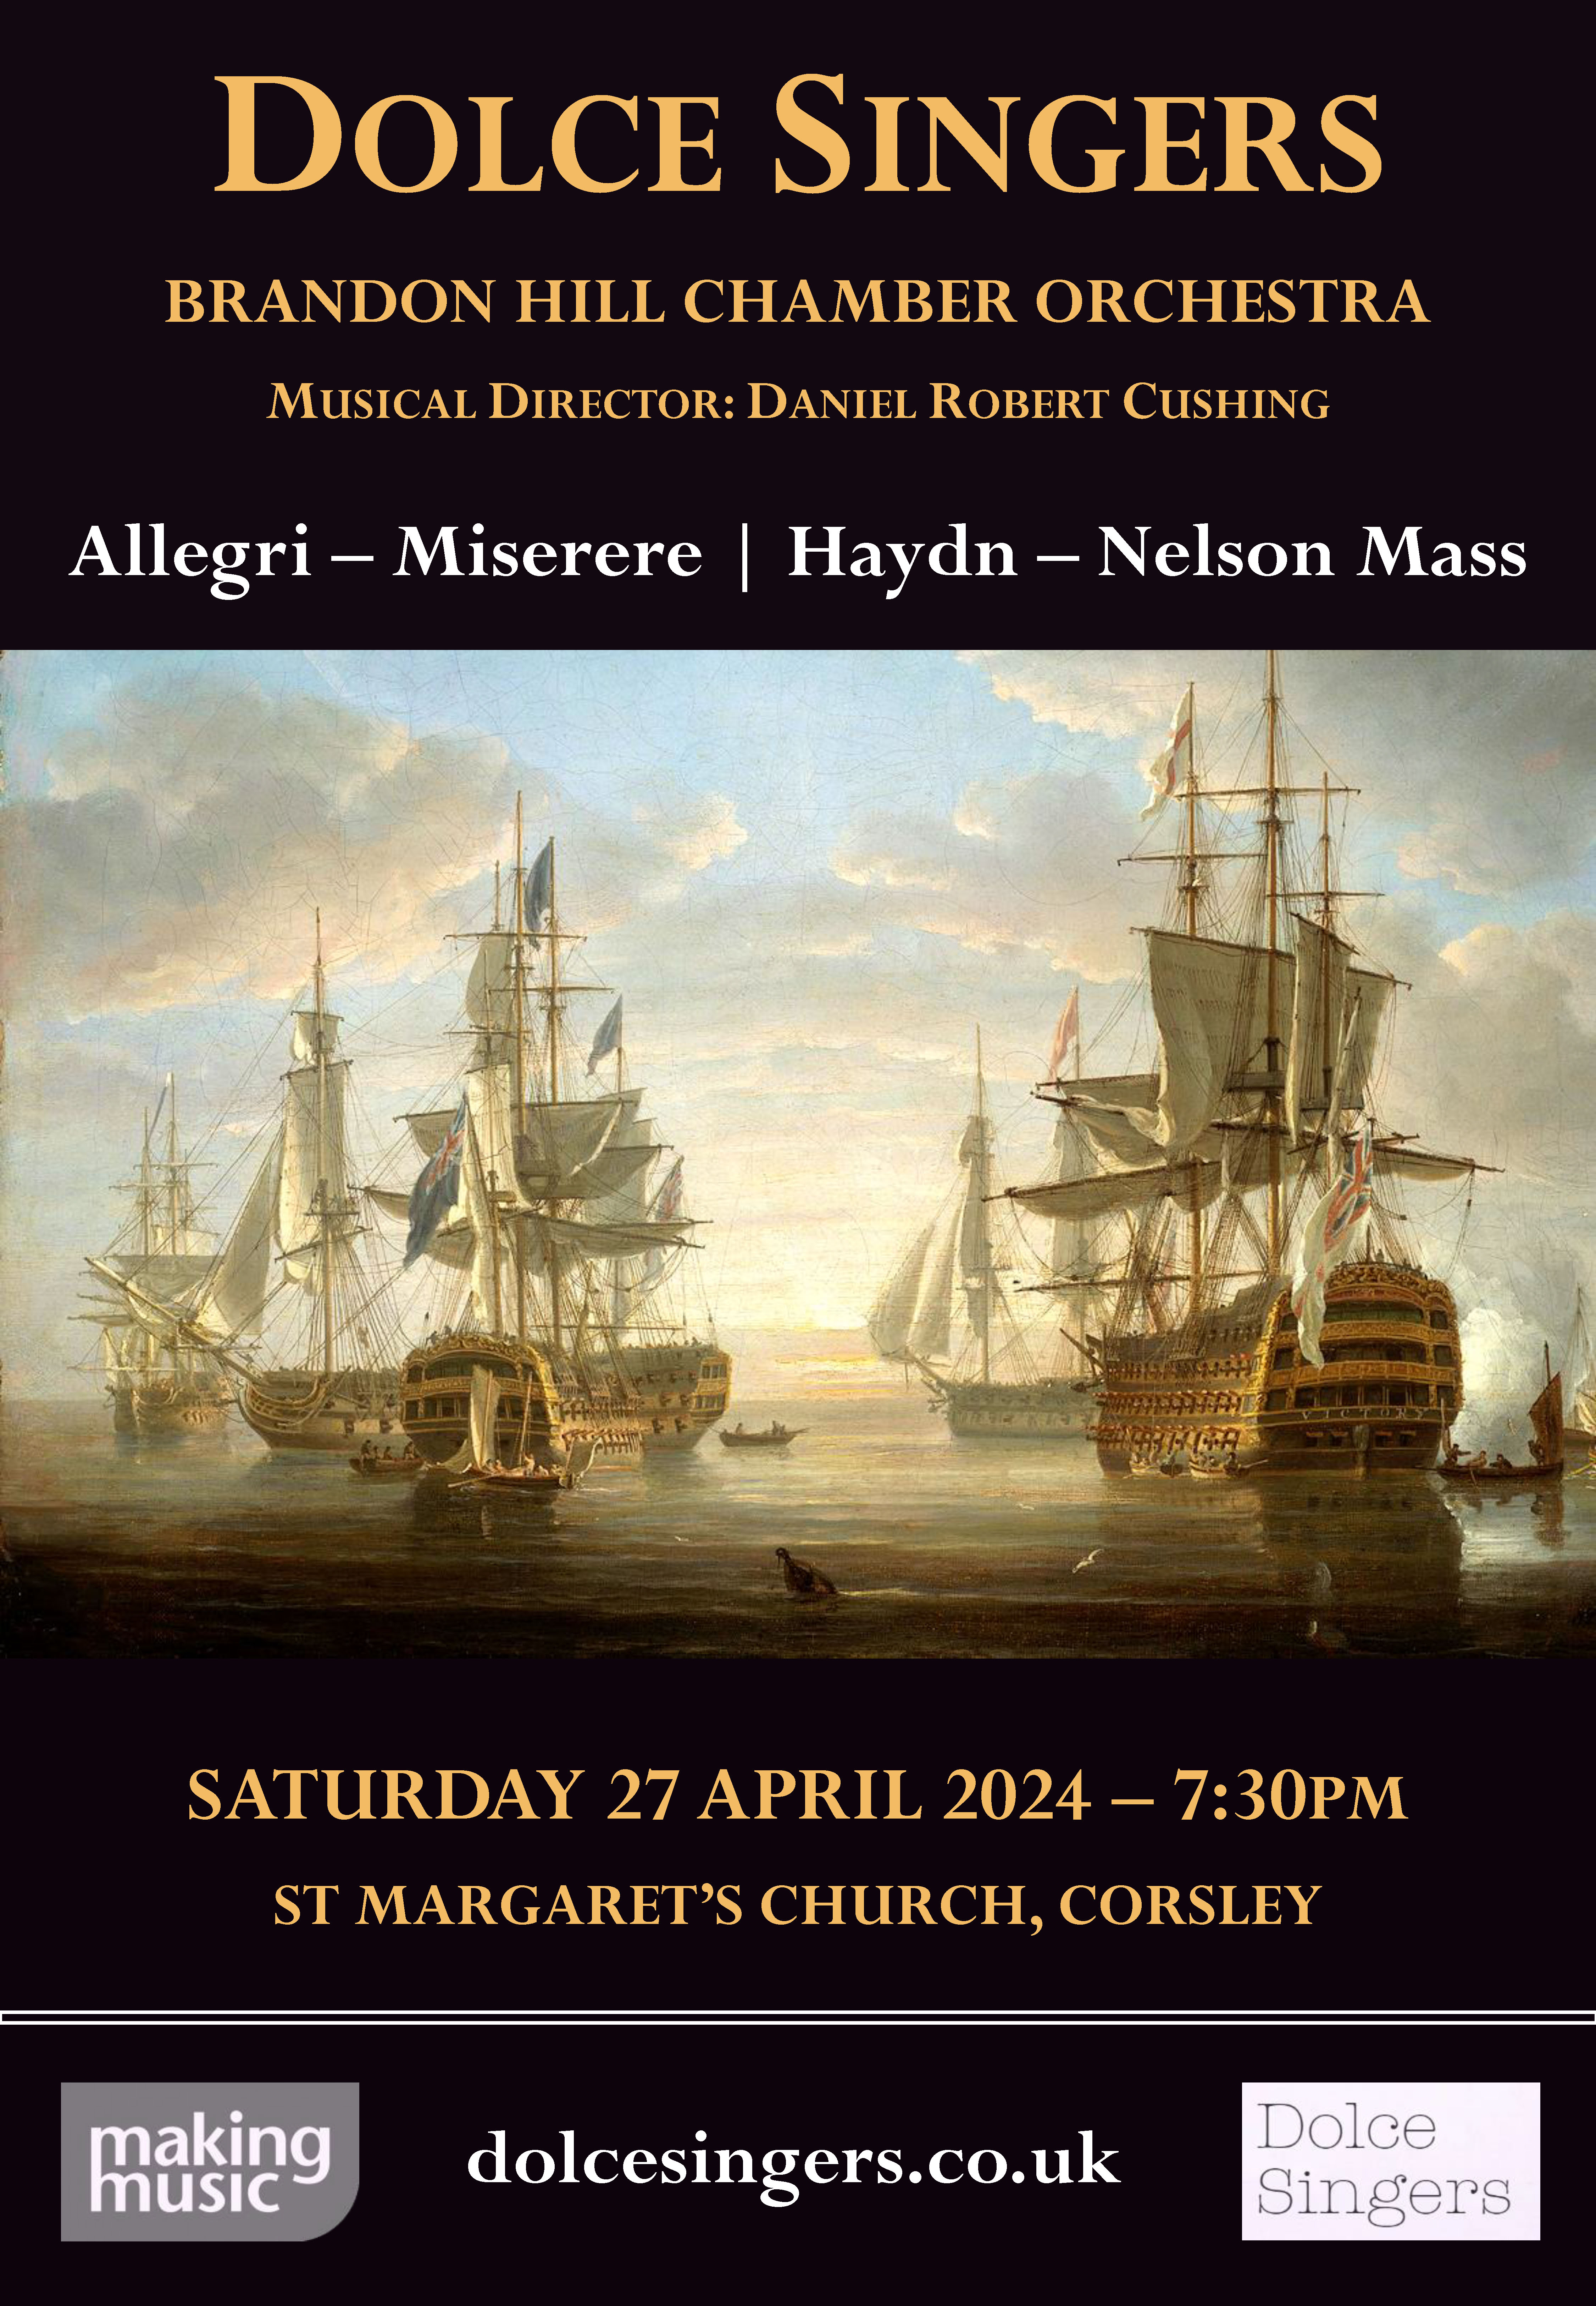 Dolce Singers at St Margaret's Church, Corsley, 27th April 2024